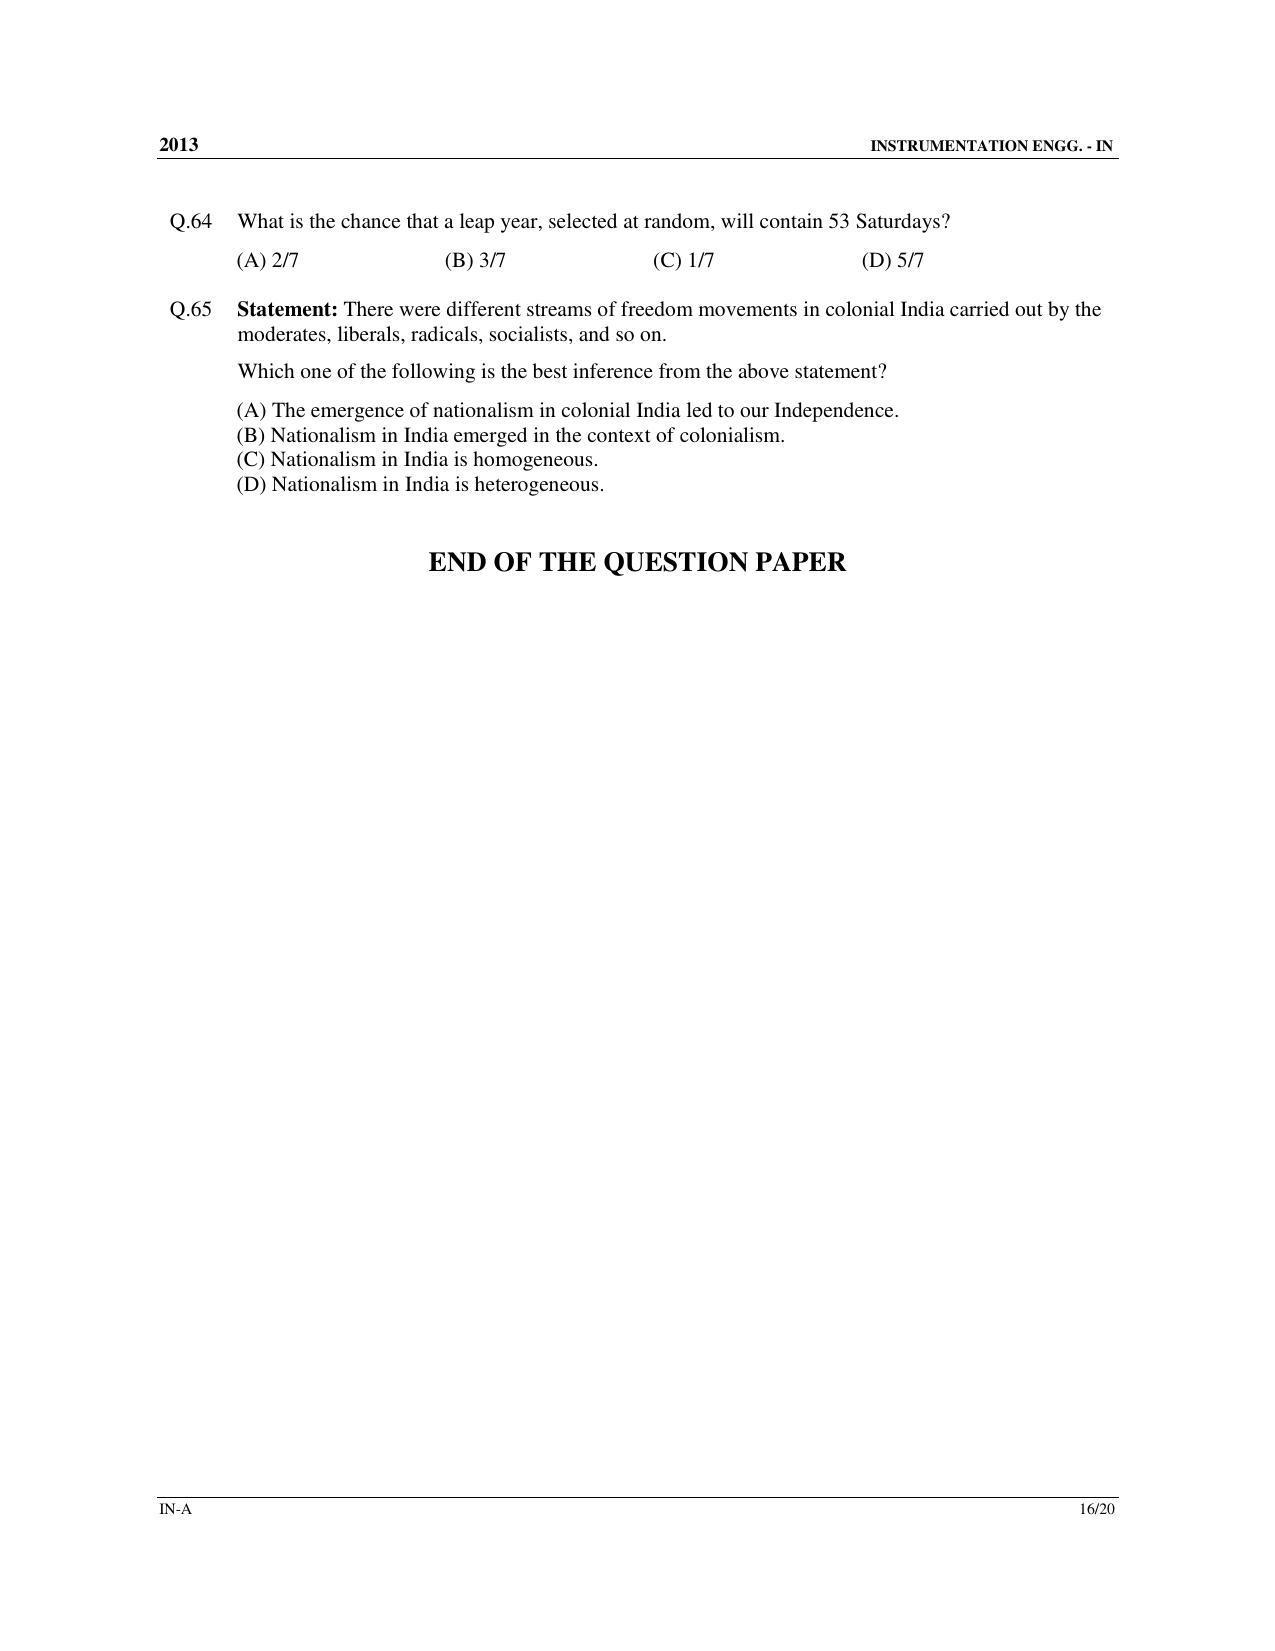 GATE 2013 Instrumentation Engineering (IN) Question Paper with Answer Key - Page 17